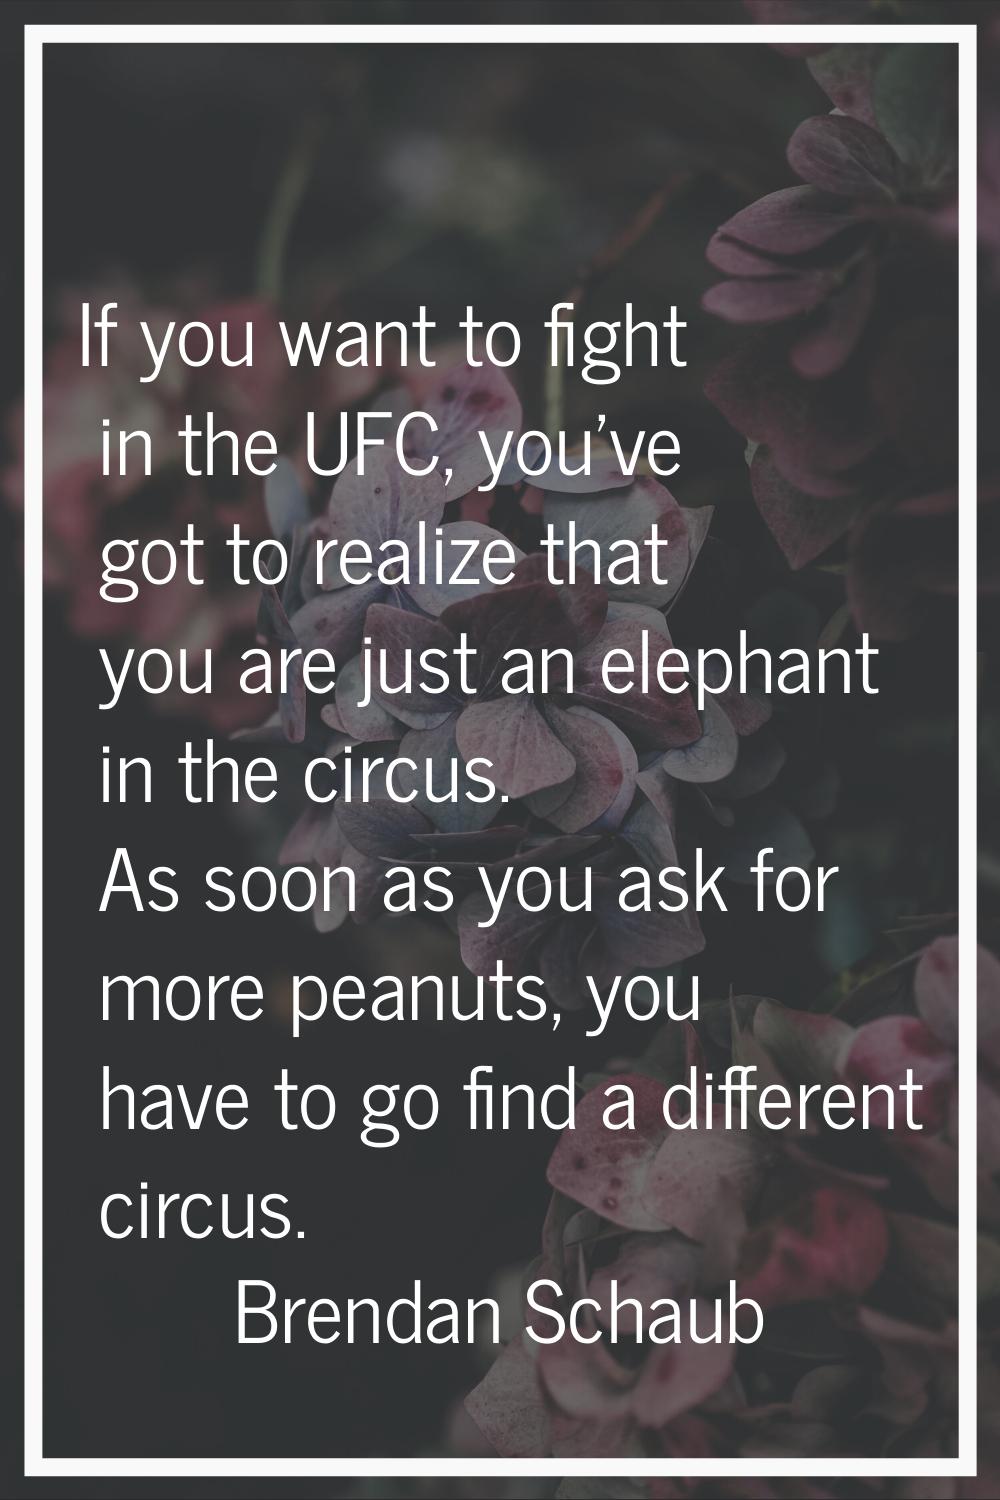 If you want to fight in the UFC, you've got to realize that you are just an elephant in the circus.